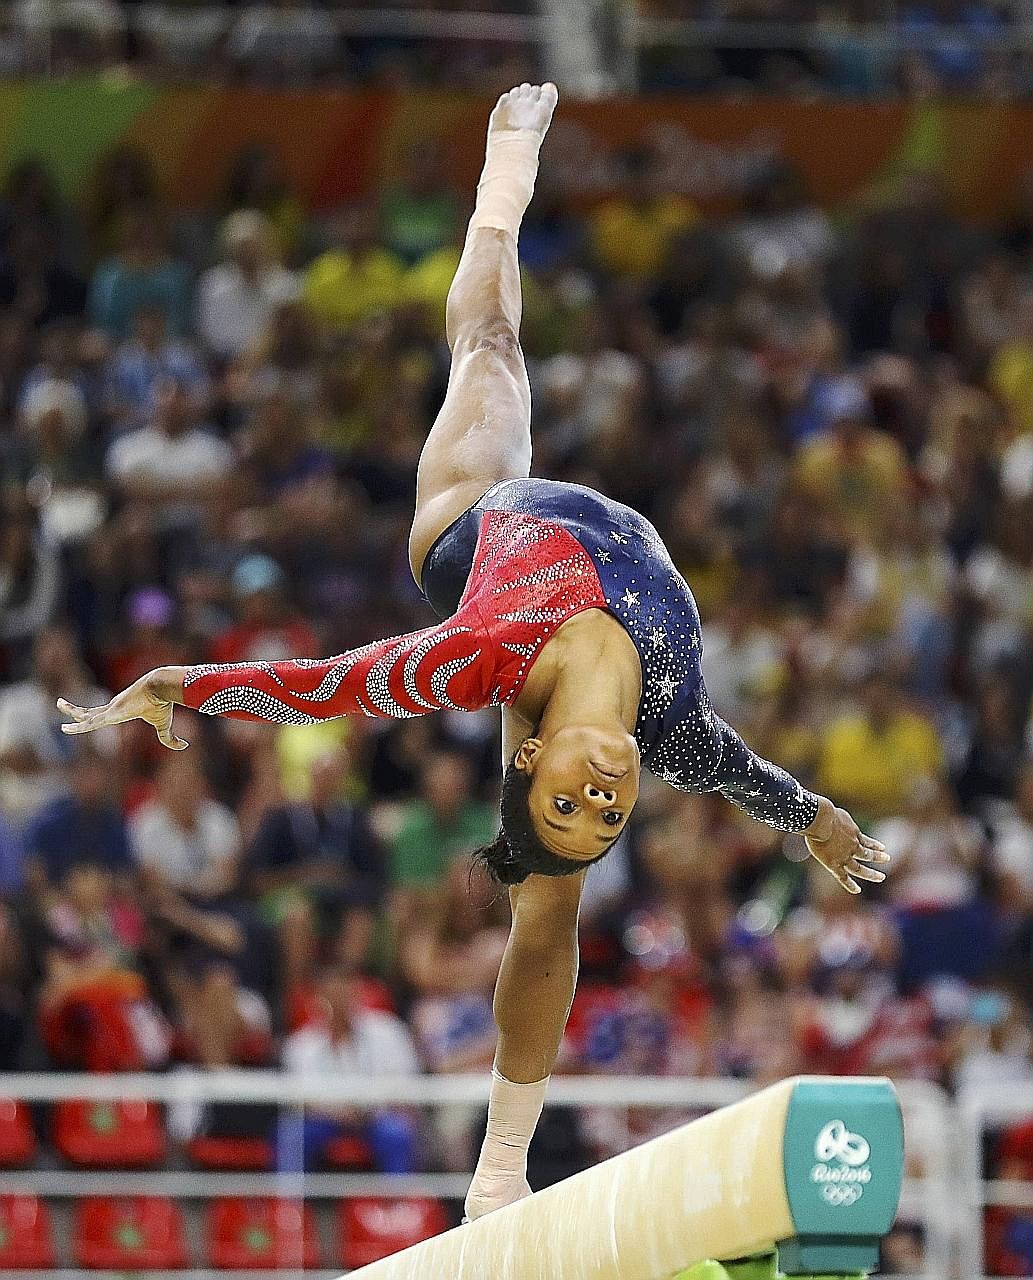 US gymnast Gabby Douglas performing at the 2016 Rio Olympics. In the run-up to the London Games in 2012, it was said that her mother had filed for bankruptcy, brought on partly by the high cost of the gymnast's training.